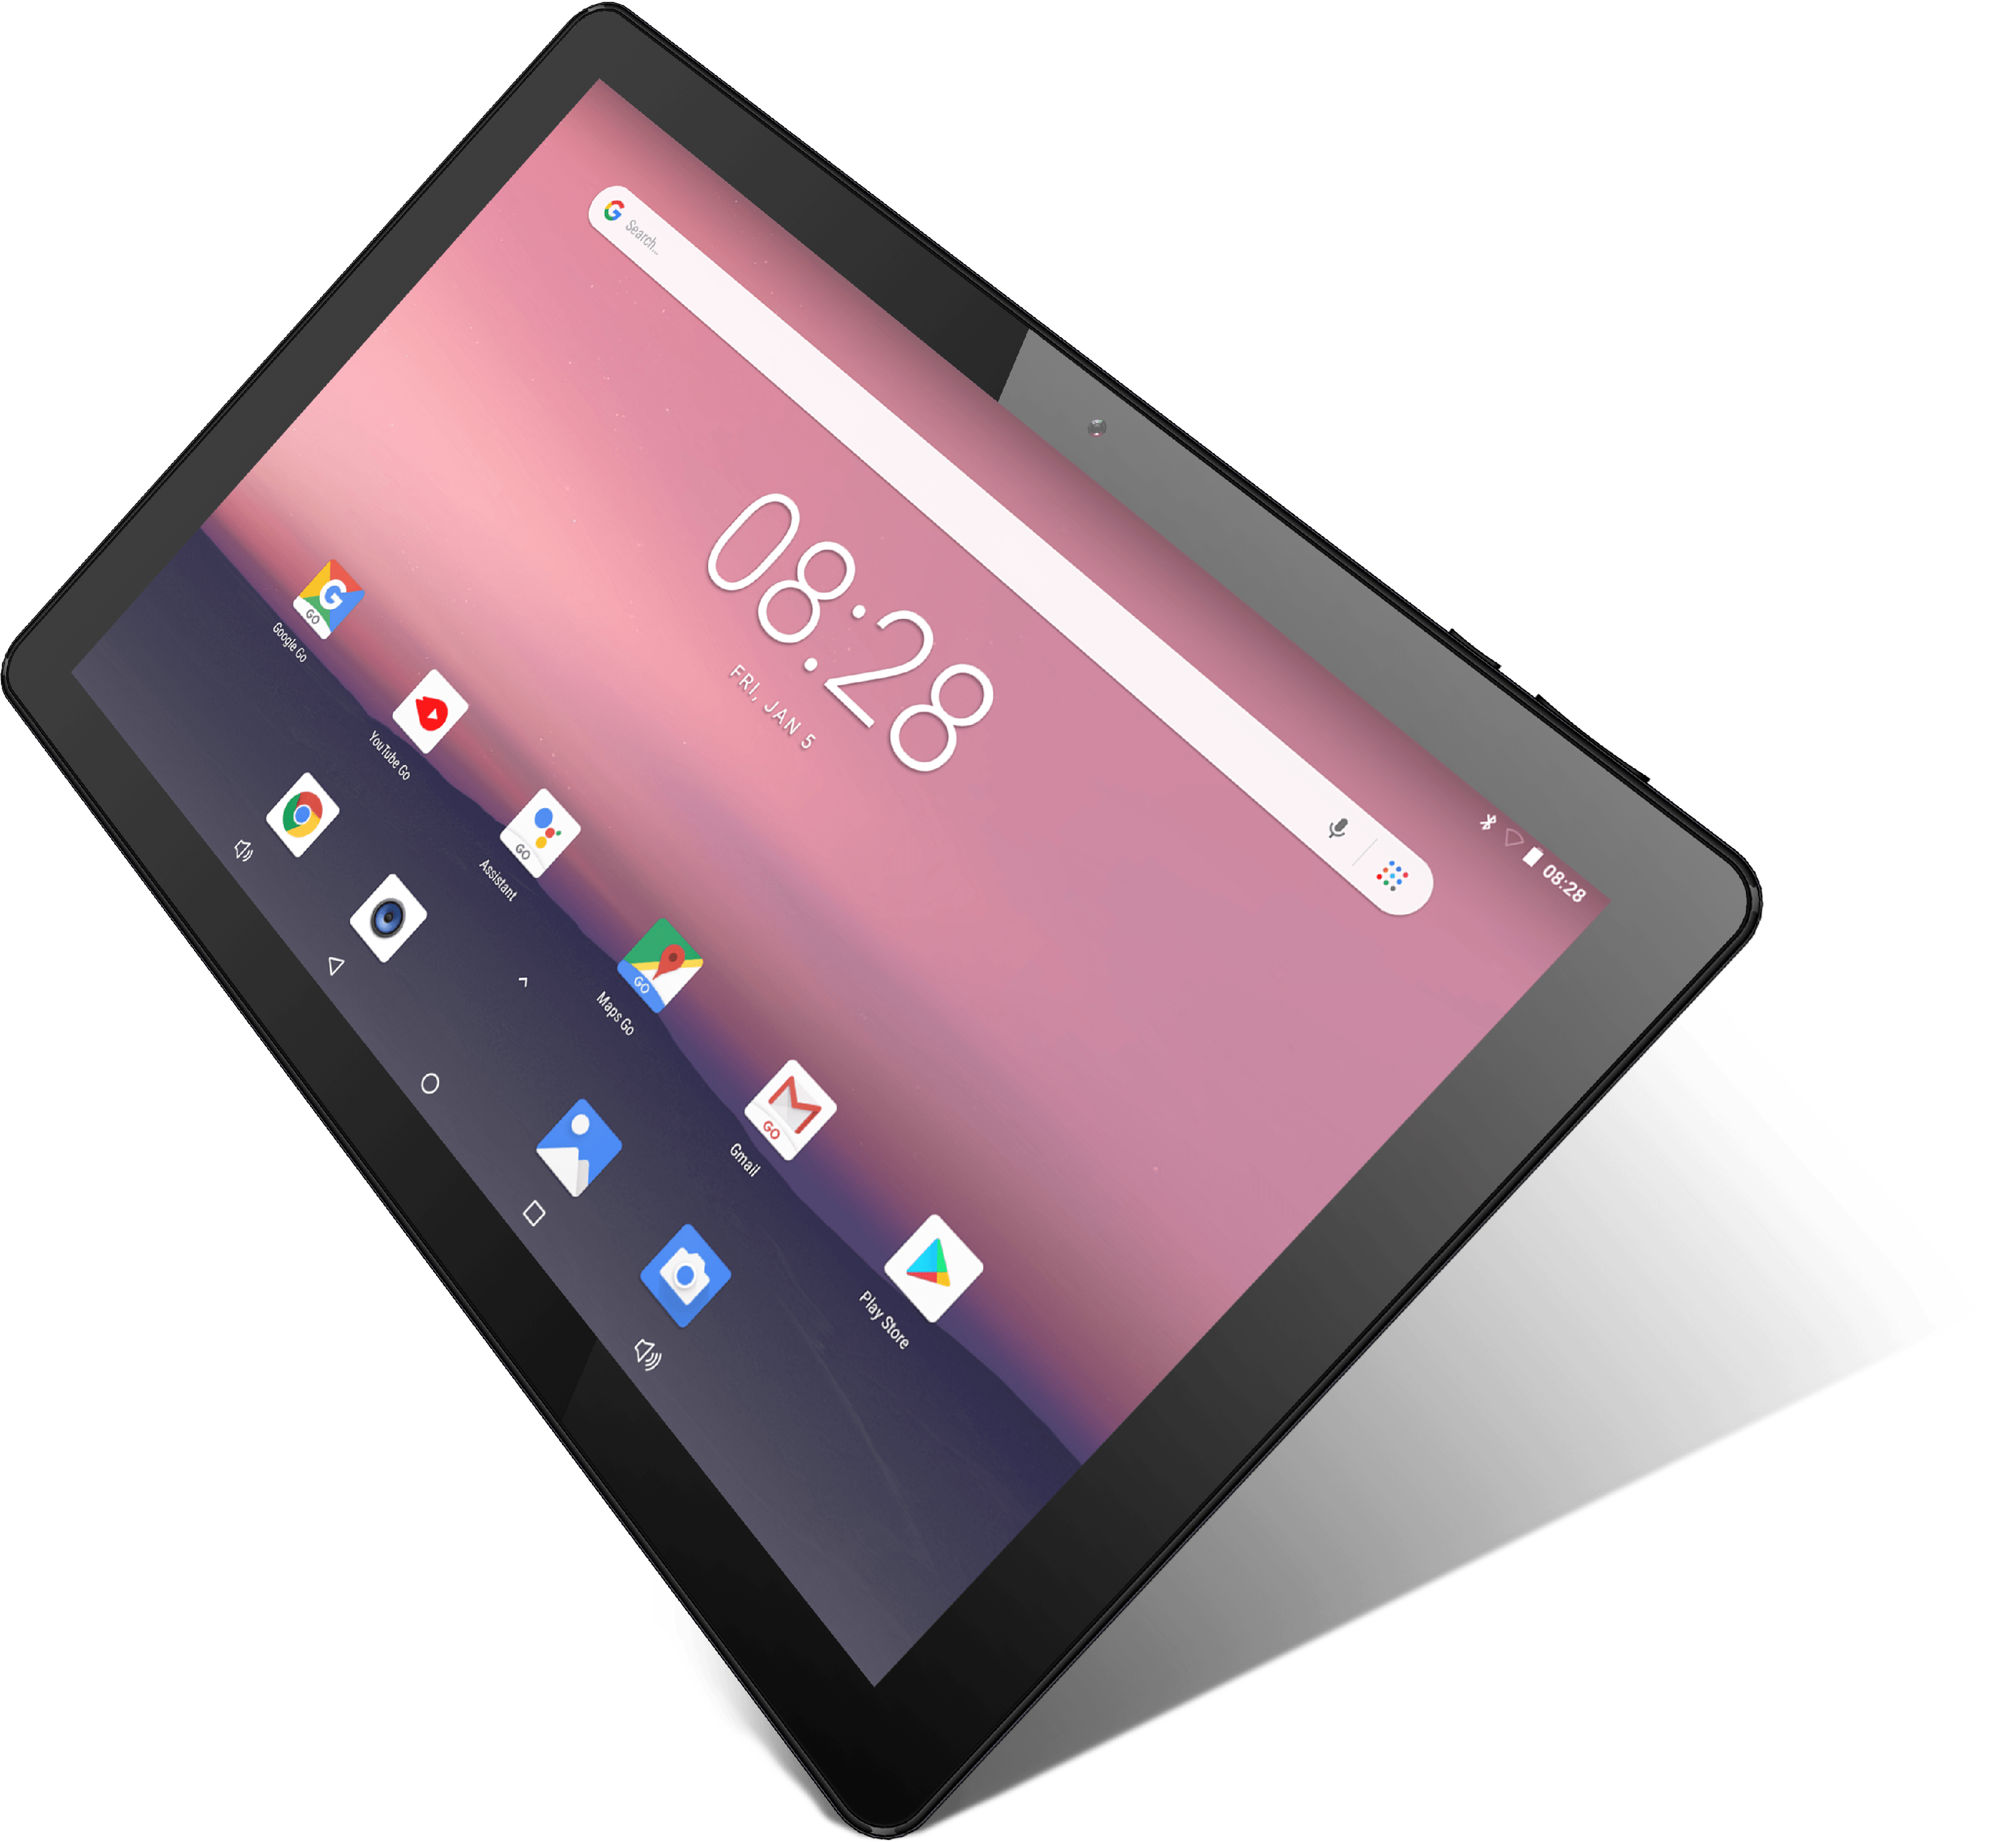 iView 10.1″ Tablet, Android 8.1 Go Edition, Quad Core, 16GB Storage